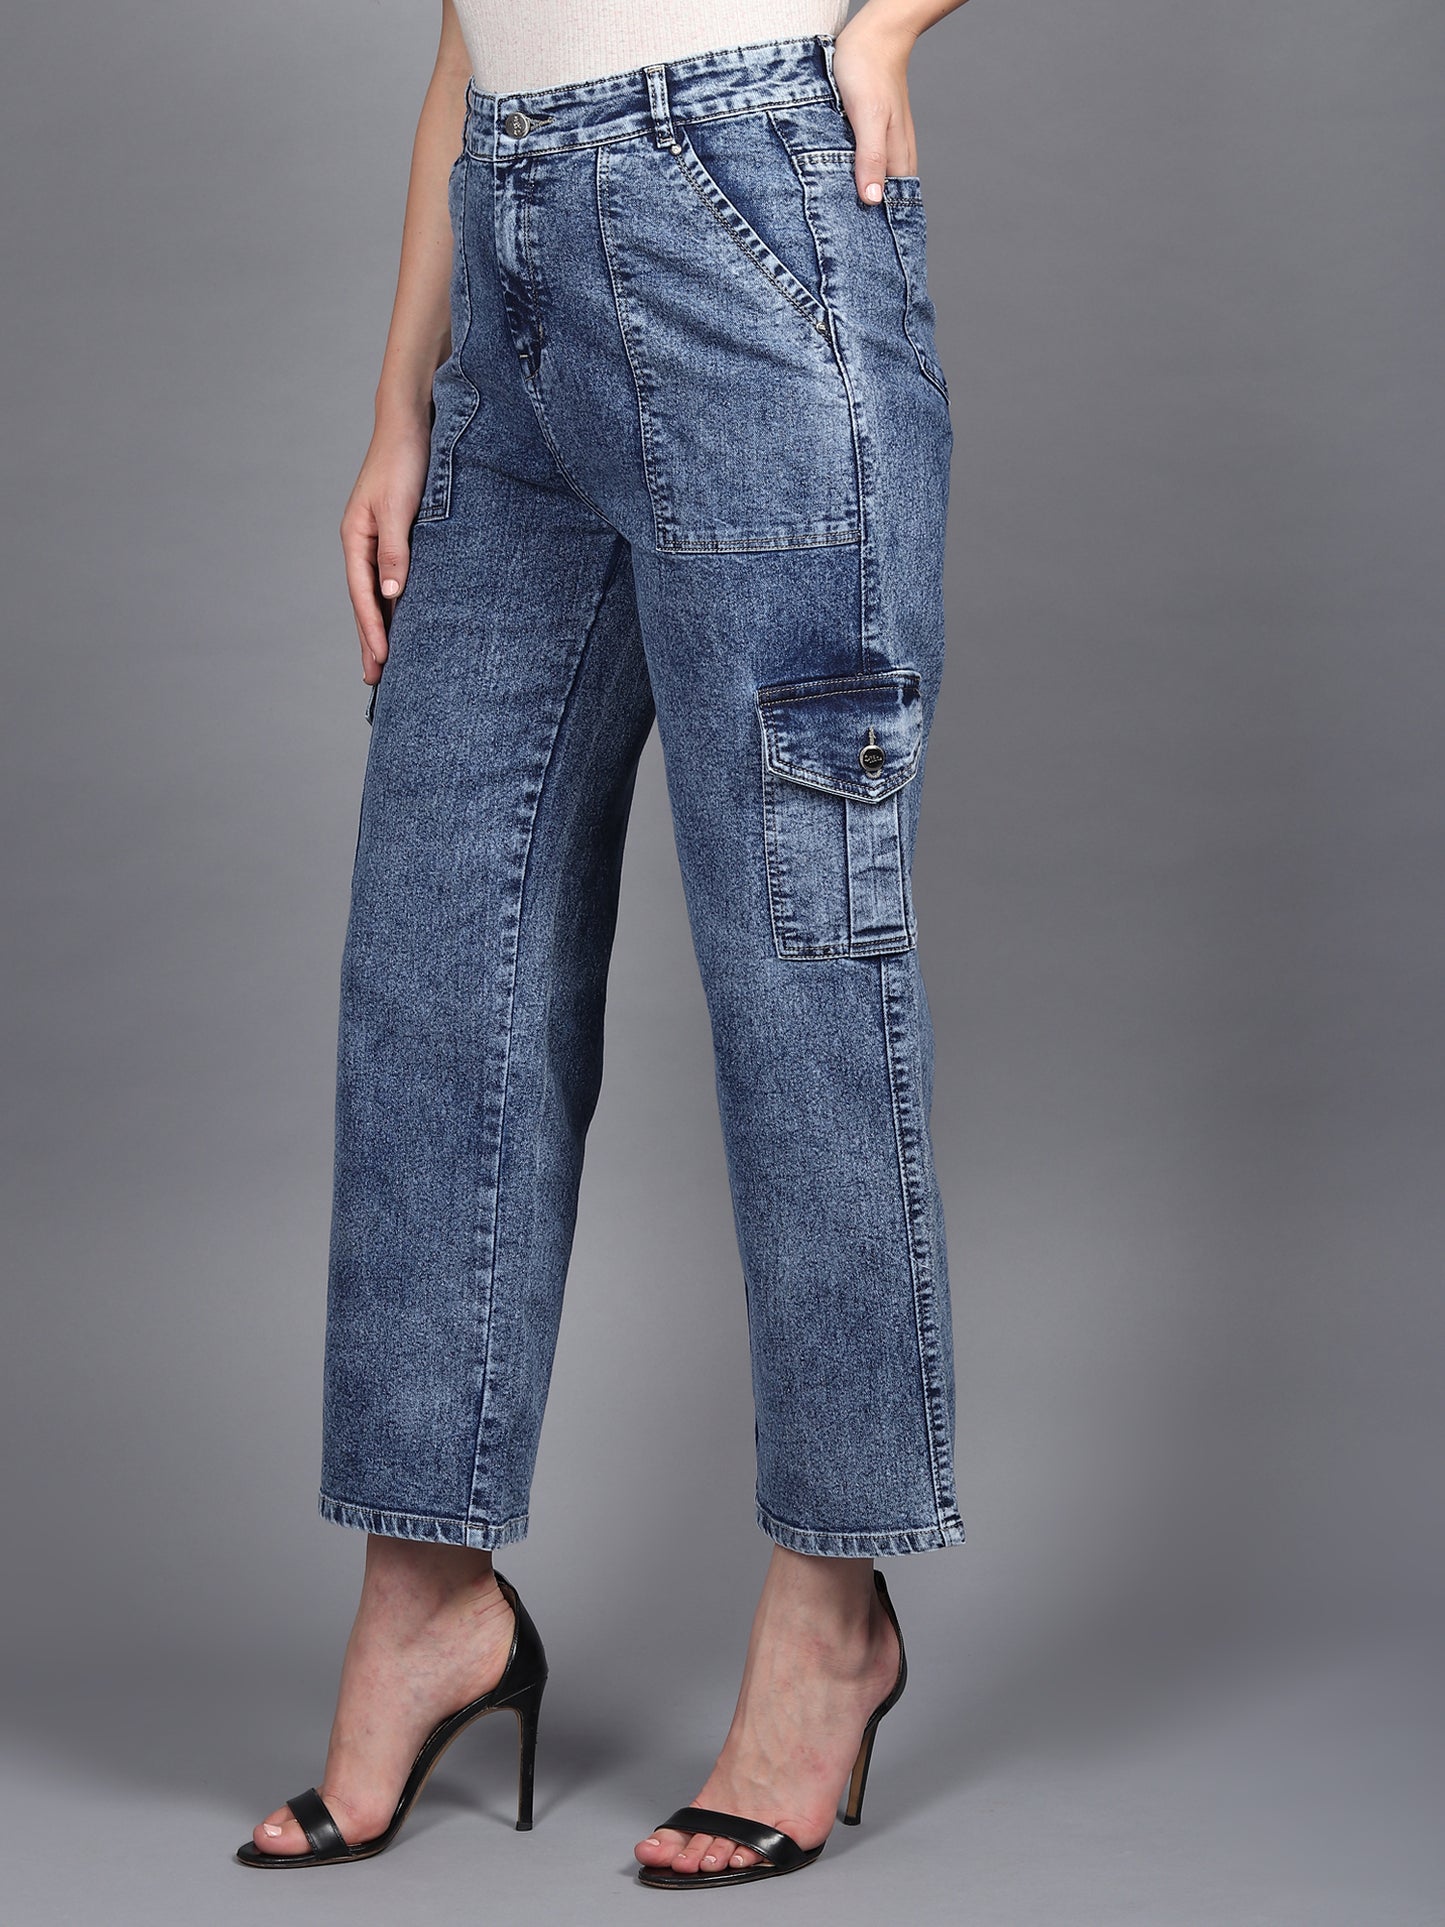 Blue Cargo Jeans For Women High Waist Straight Fit Stretchable Denim - 1215